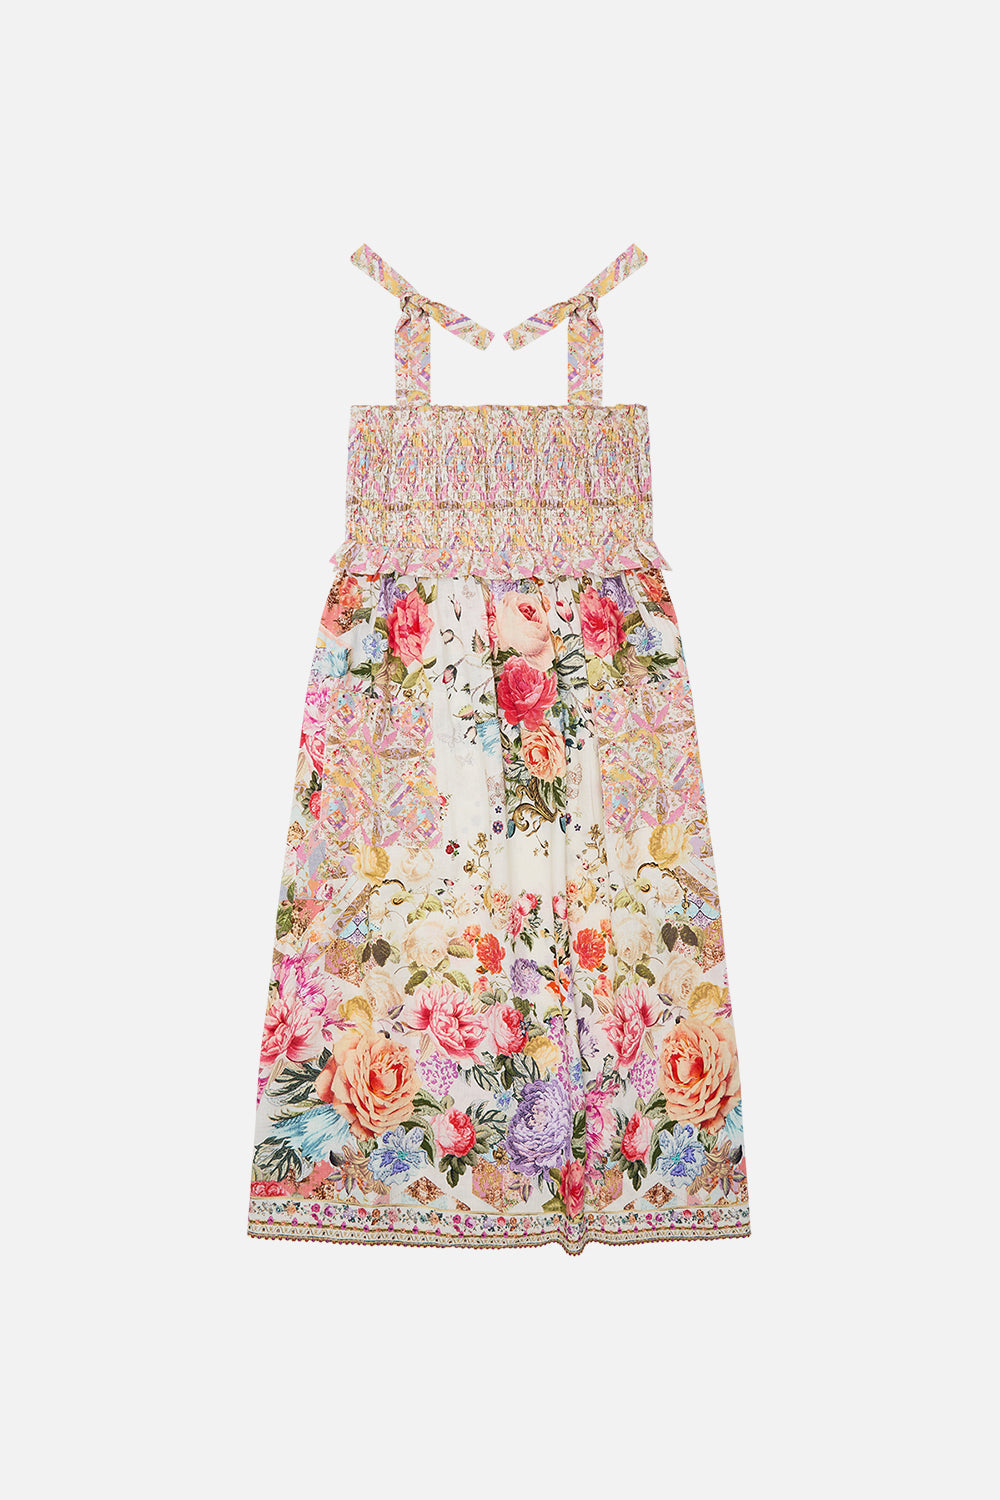 Milla by CAMILLA floral kids maxi dress with shirring pockets (12-14) in Sew Yesterday